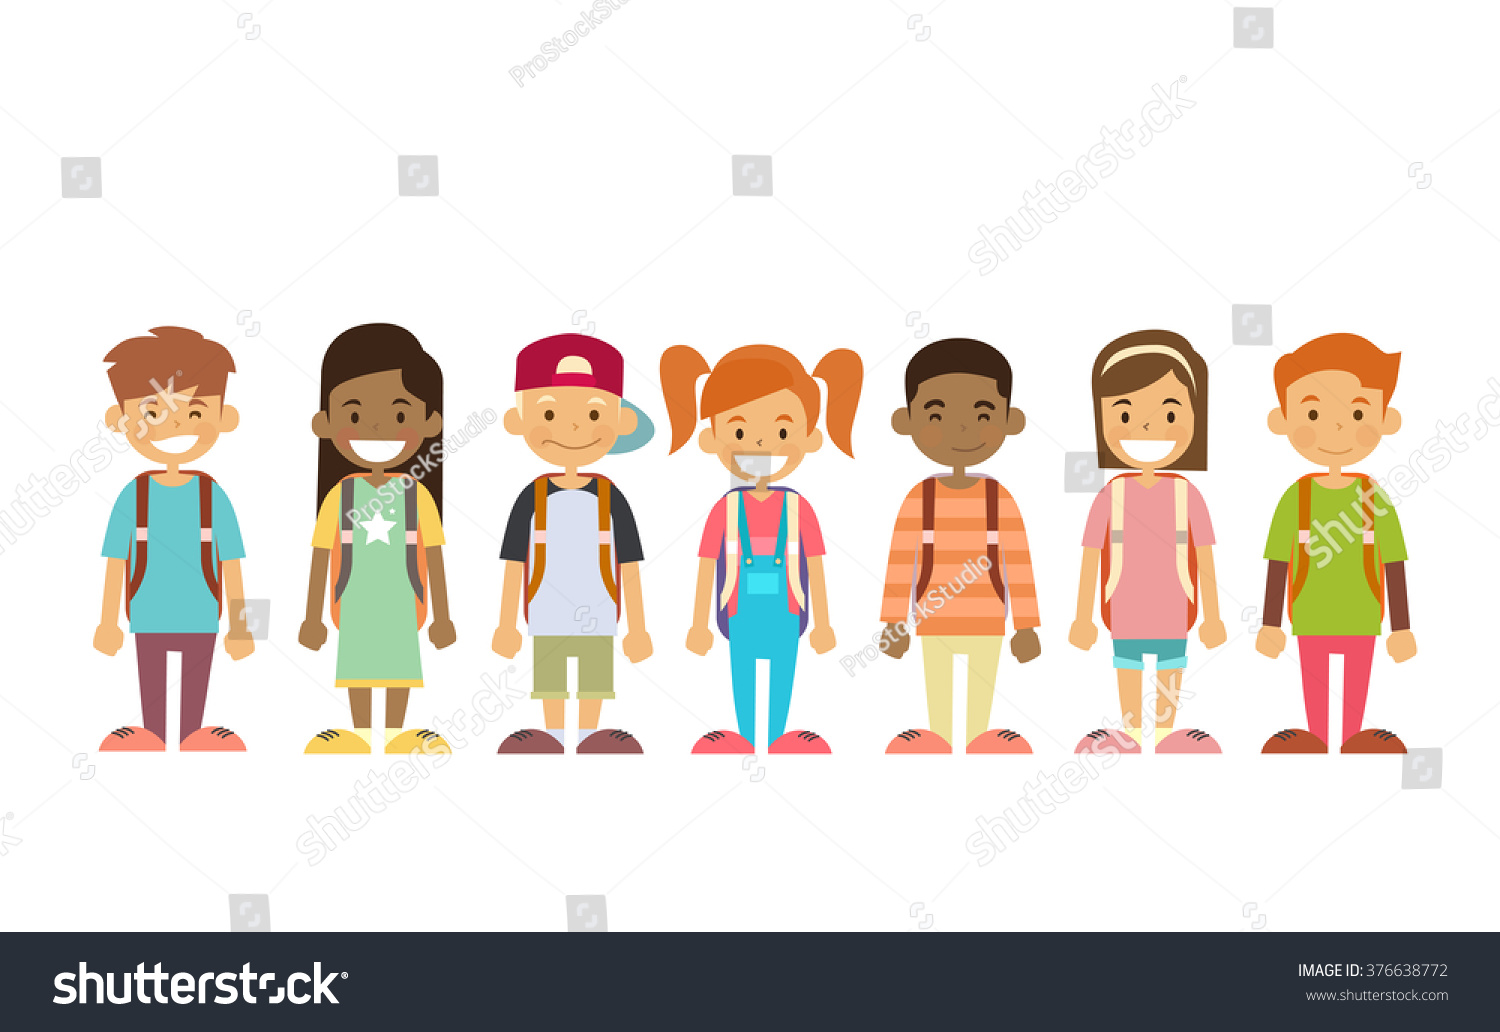 clipart students in line - photo #14